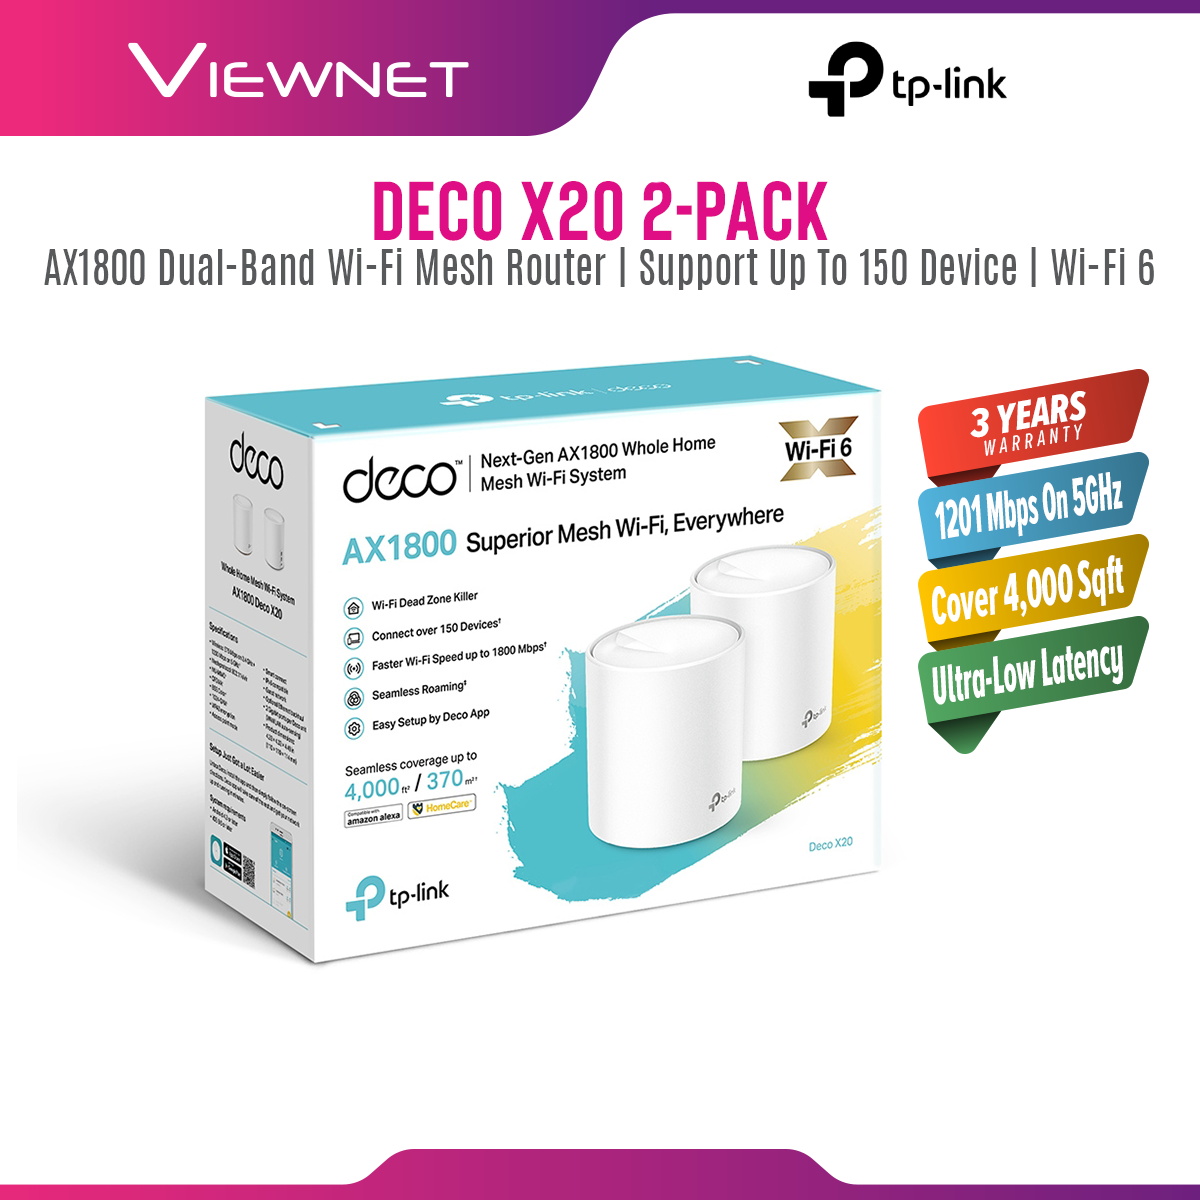 [Fast ShipmentðŸš€] TP-Link Deco X20 (2-Pack) WIFI 6 AX1800 Gigabit Whole Home Mesh WiFi Wireless Router Wi-Fi System TP-Link Deco X20 2 PACK